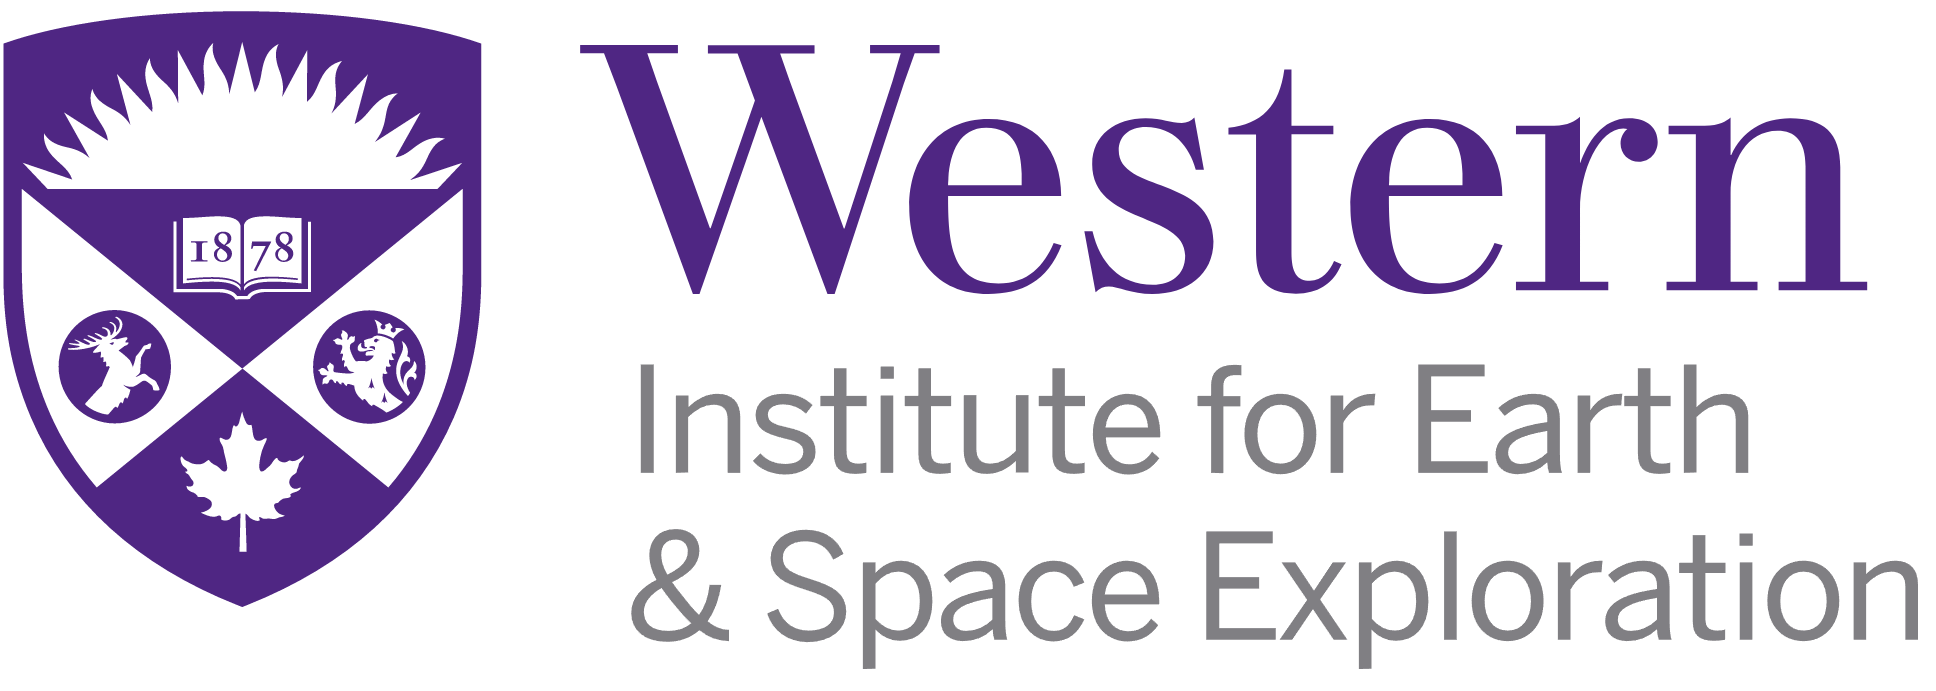 Western Institute for Earth and Space Exploration